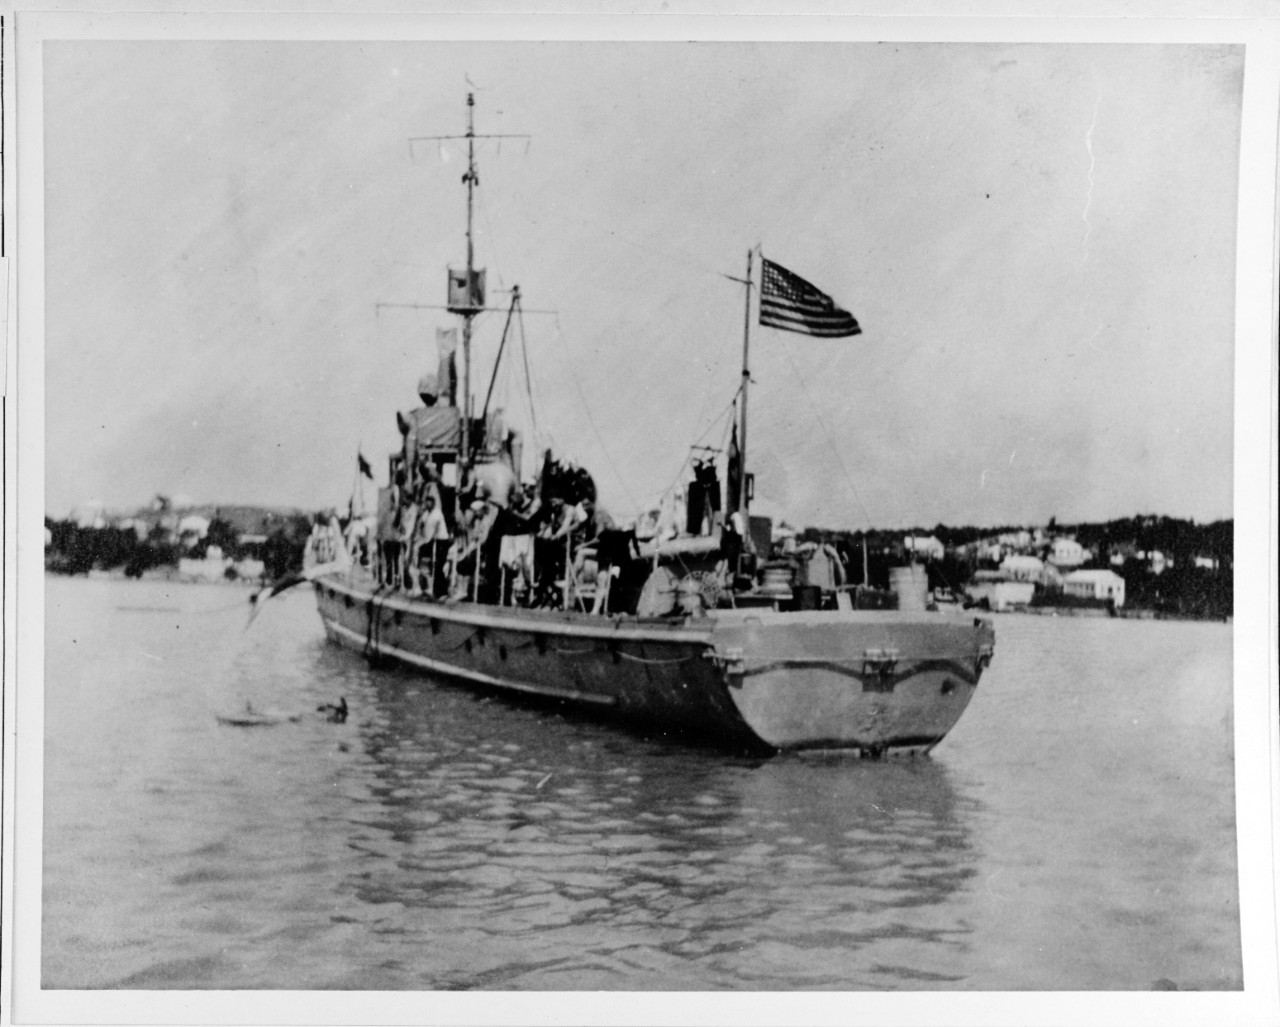 Crew of USS SC-143 swimming alongside the boat during World War I.